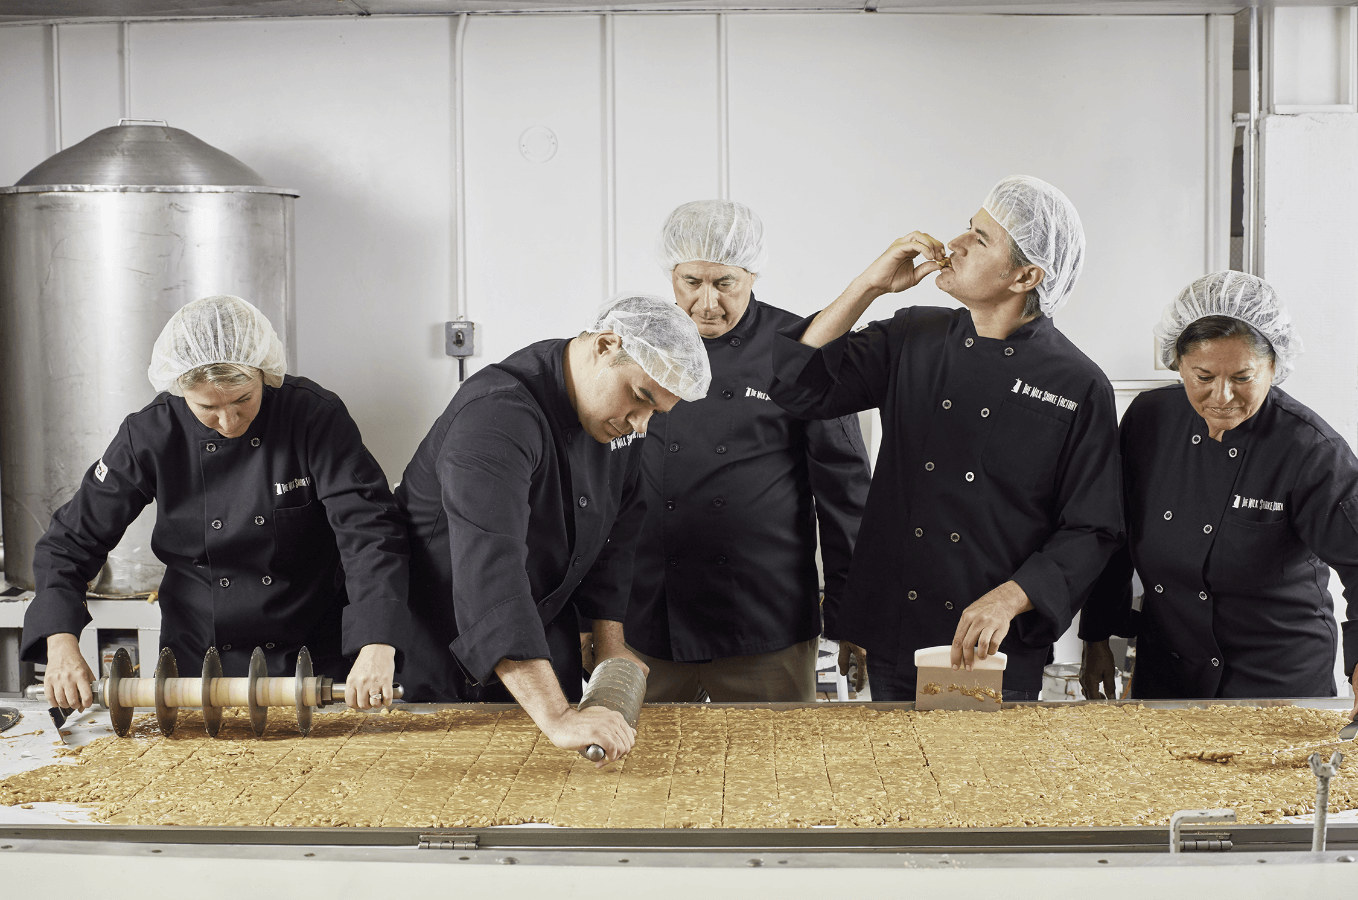 group of people cutting chocolate